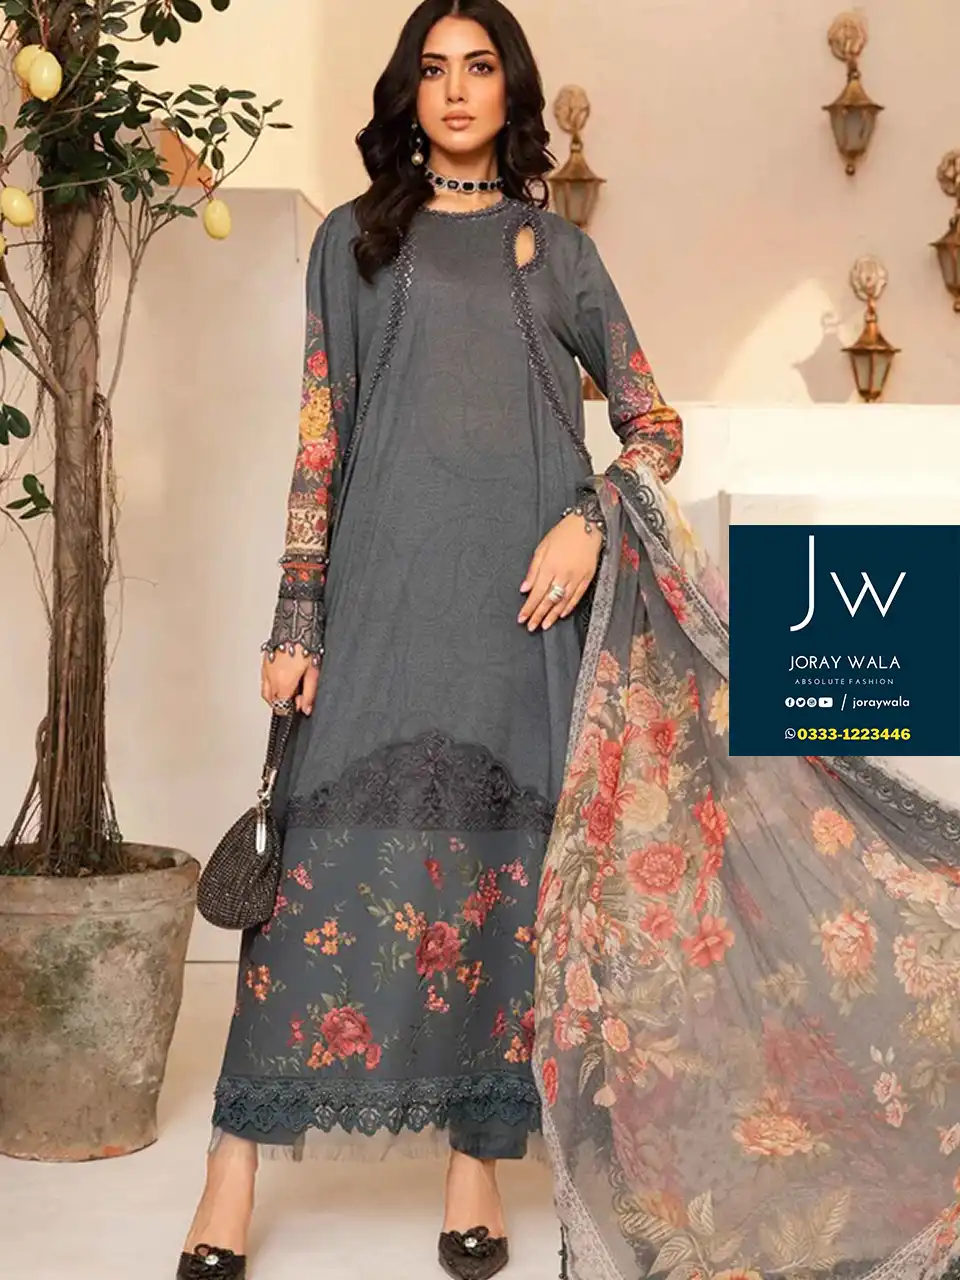 Partywear Fancy Maria b Emb. 3 Pcs Collection with free delivery available at joraywala